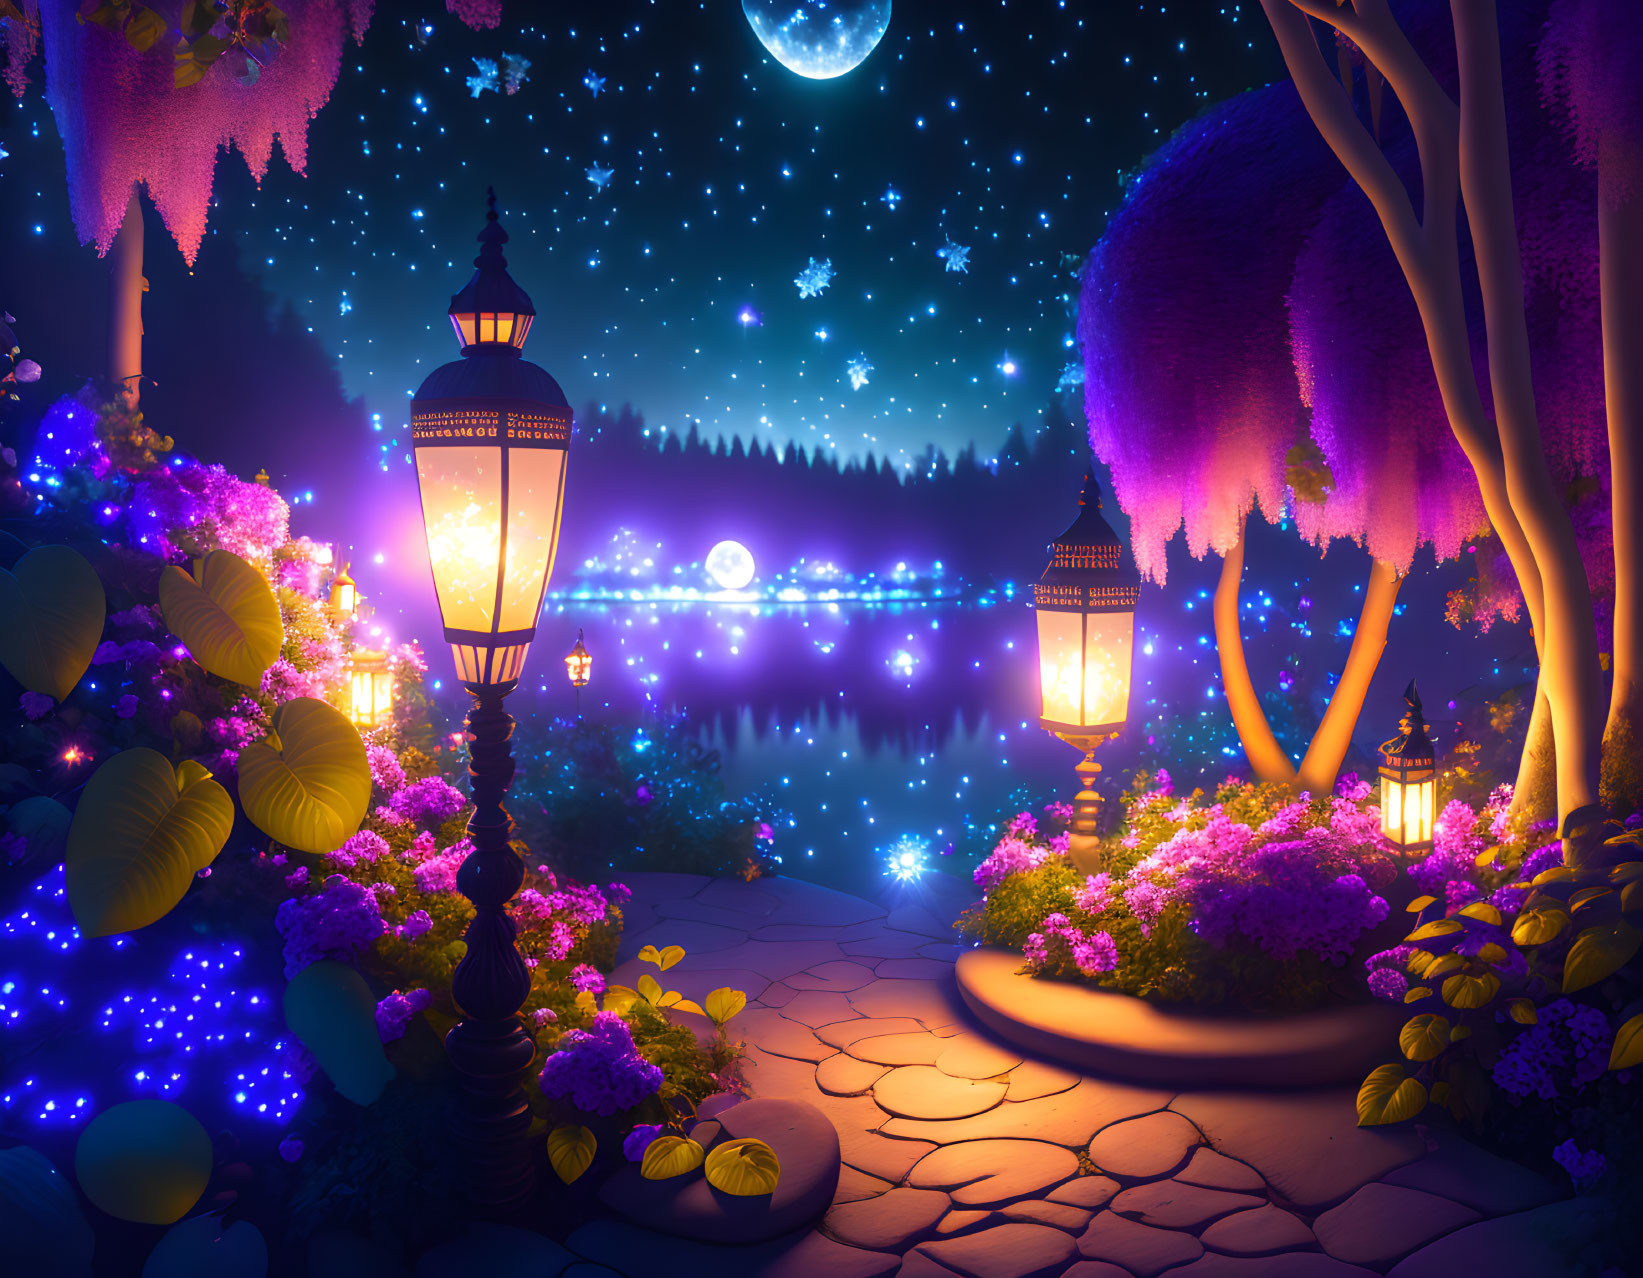 Enchanting Night Garden with Glowing Flowers and Serene Lake